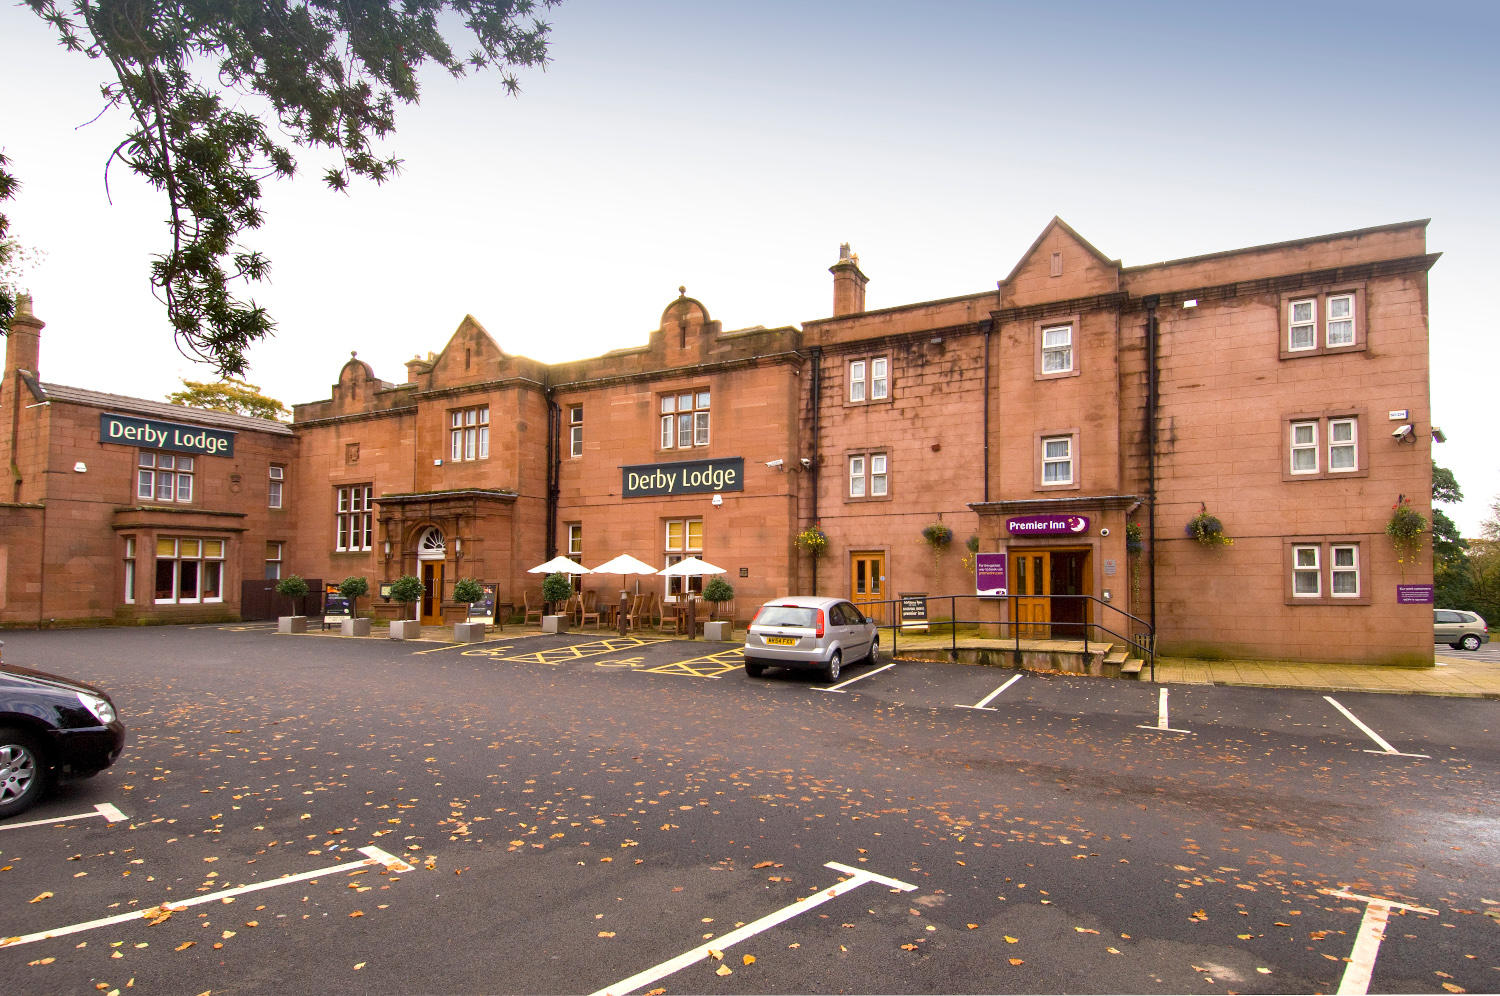 Premier Inn Liverpool (Roby) hotel exterior Premier Inn Liverpool (Roby) hotel Liverpool 03333 211108